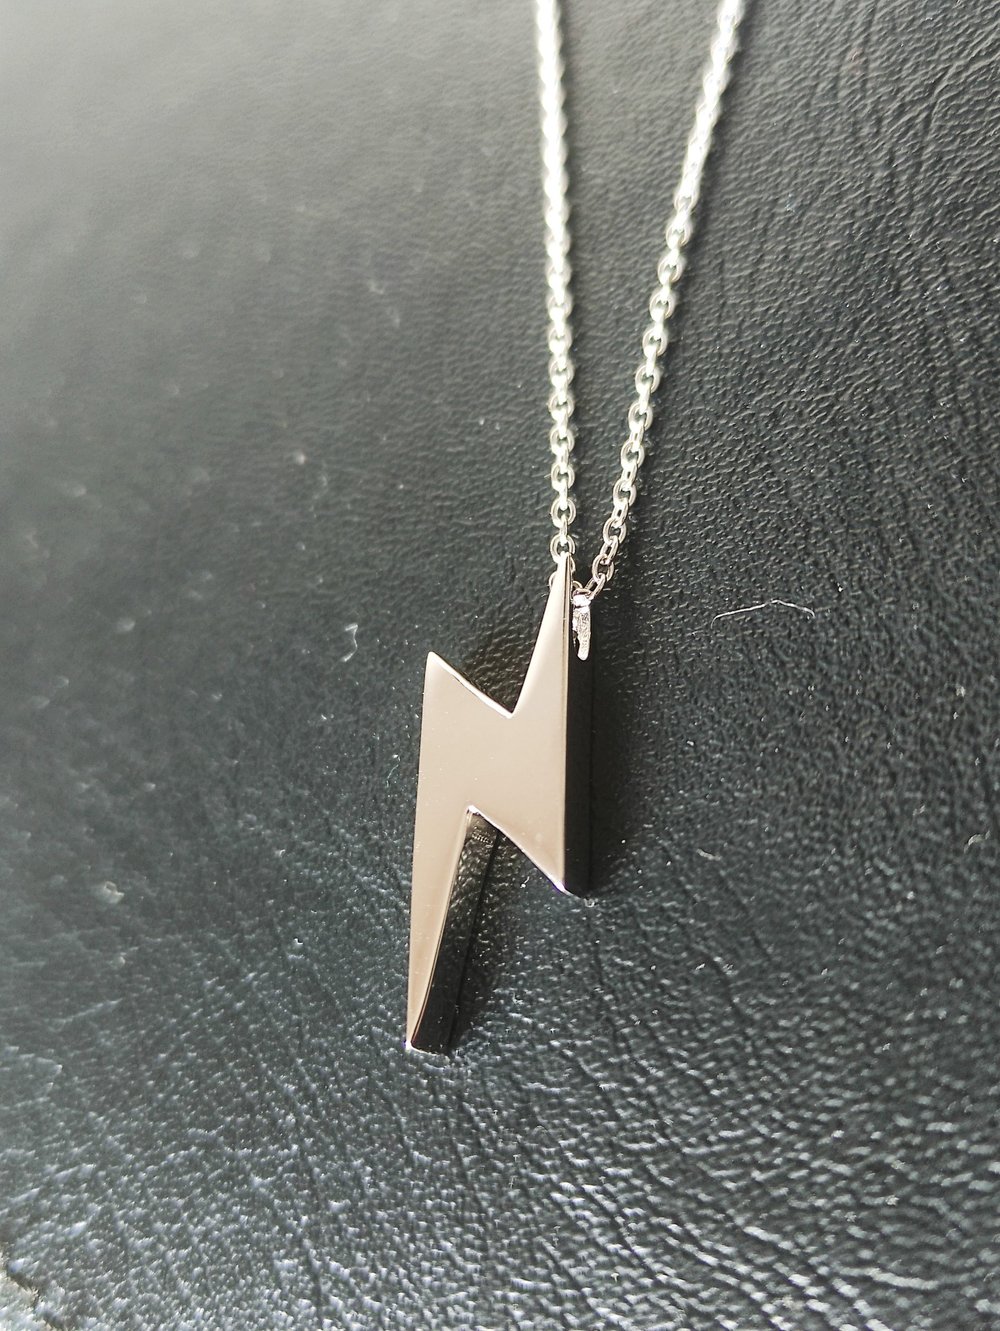 Lightning Bolt - Silver Pendant and Chain